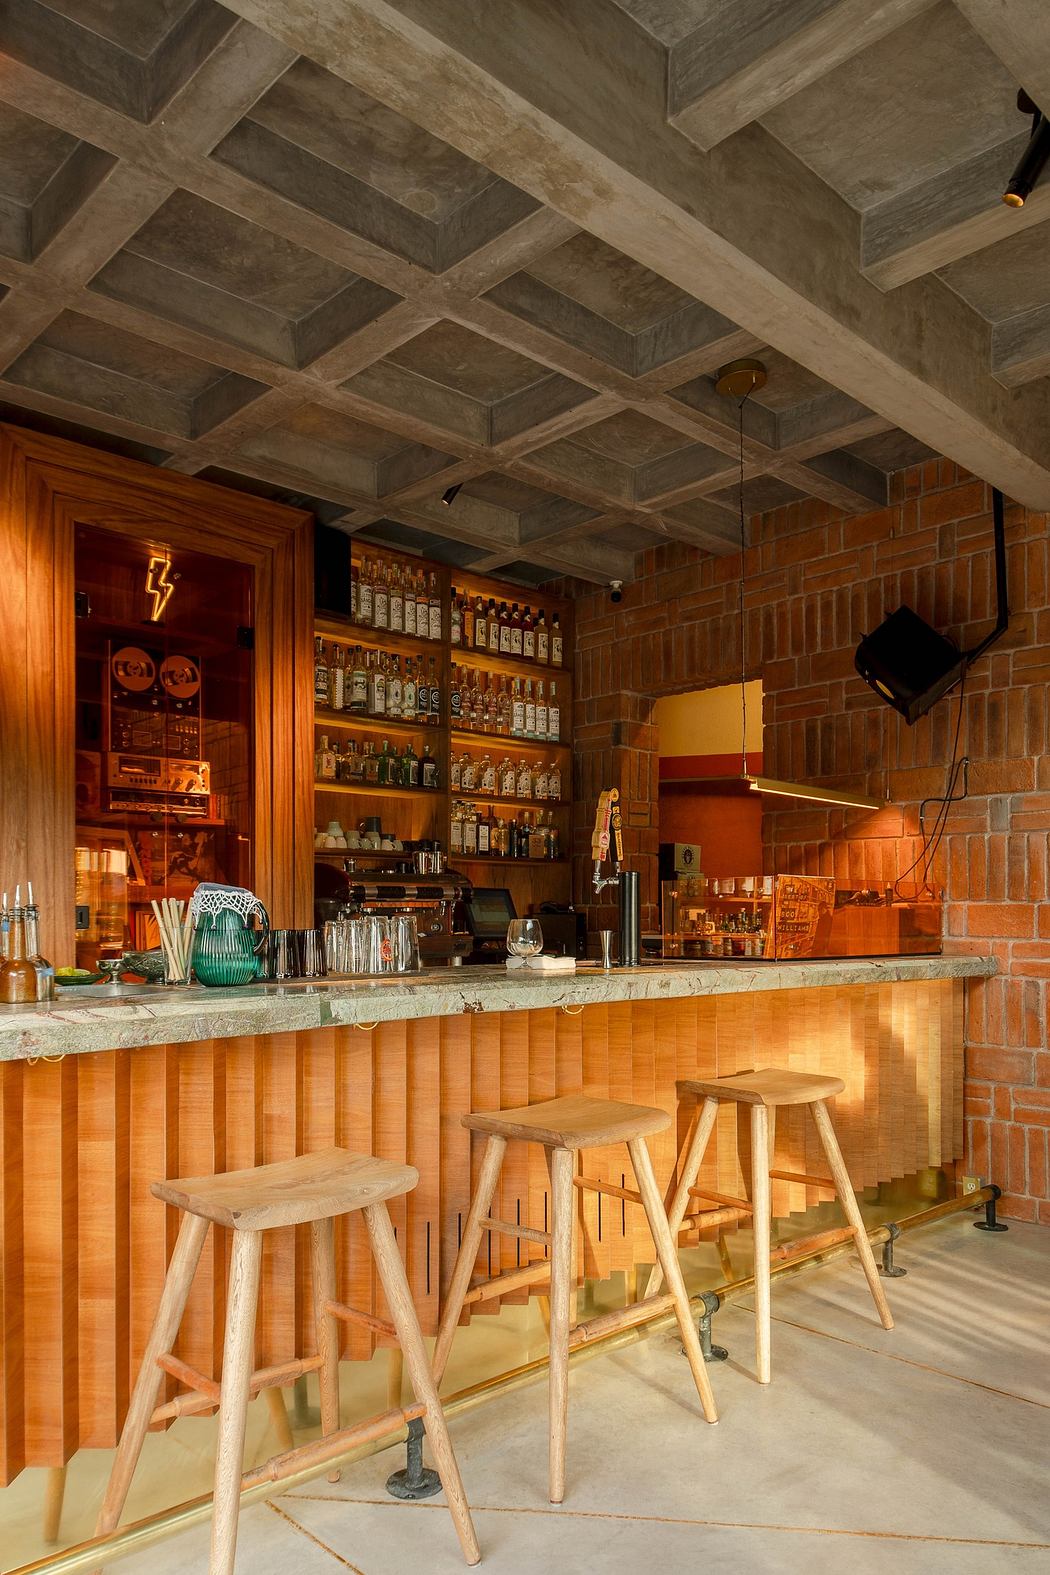 Modern bar interior with exposed concrete ceiling and brick walls, featuring wooden stools and countert